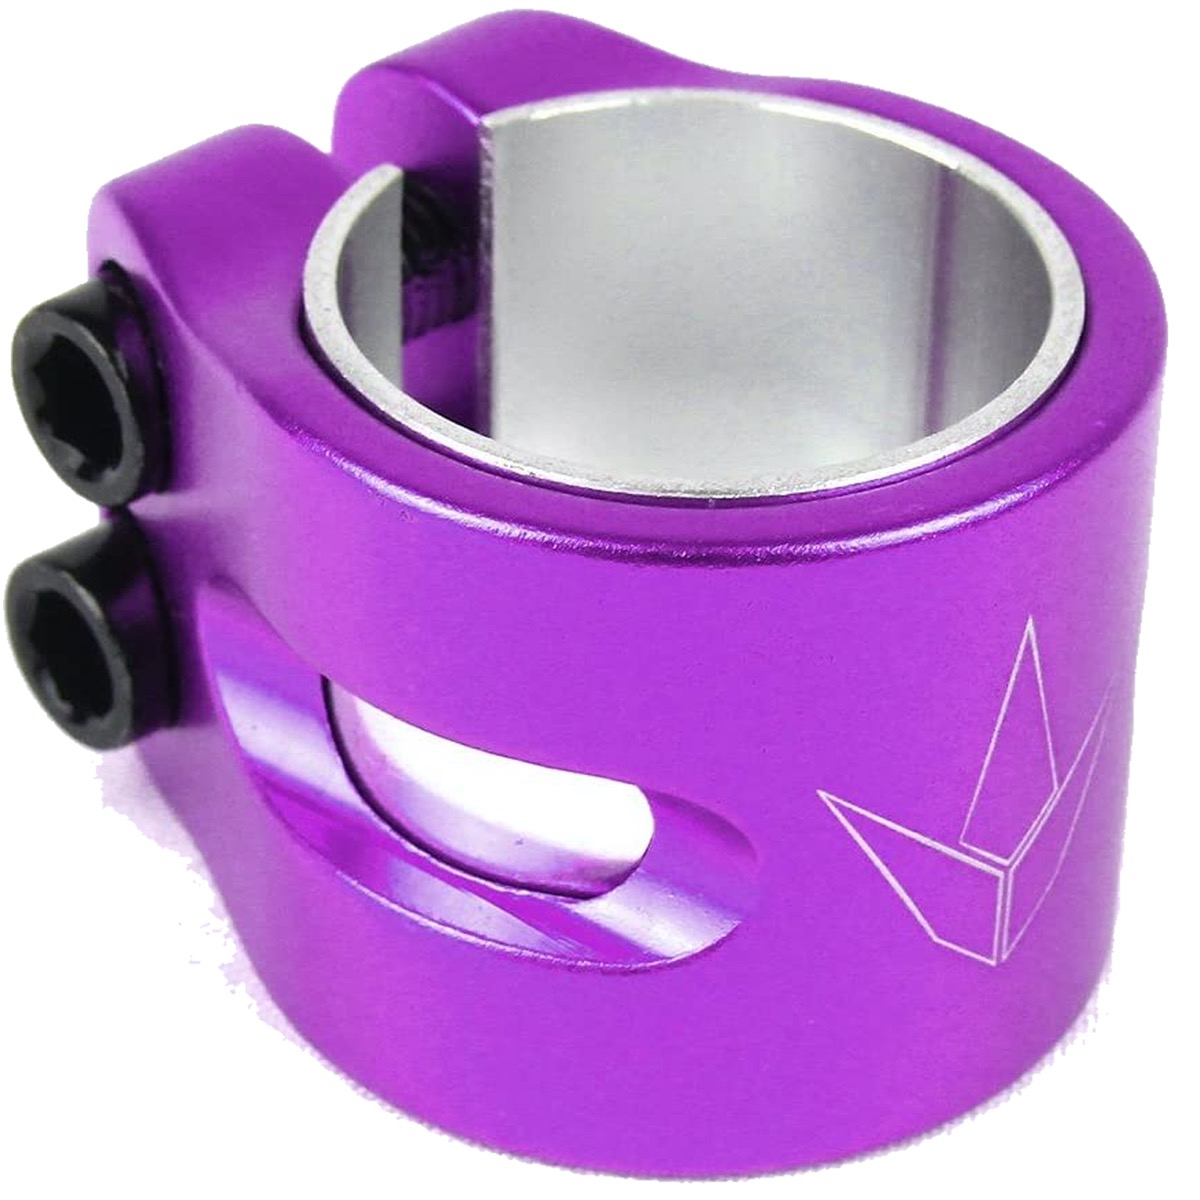 An image of Blunt Envy Purple 2 Bolt Clamp Oversized